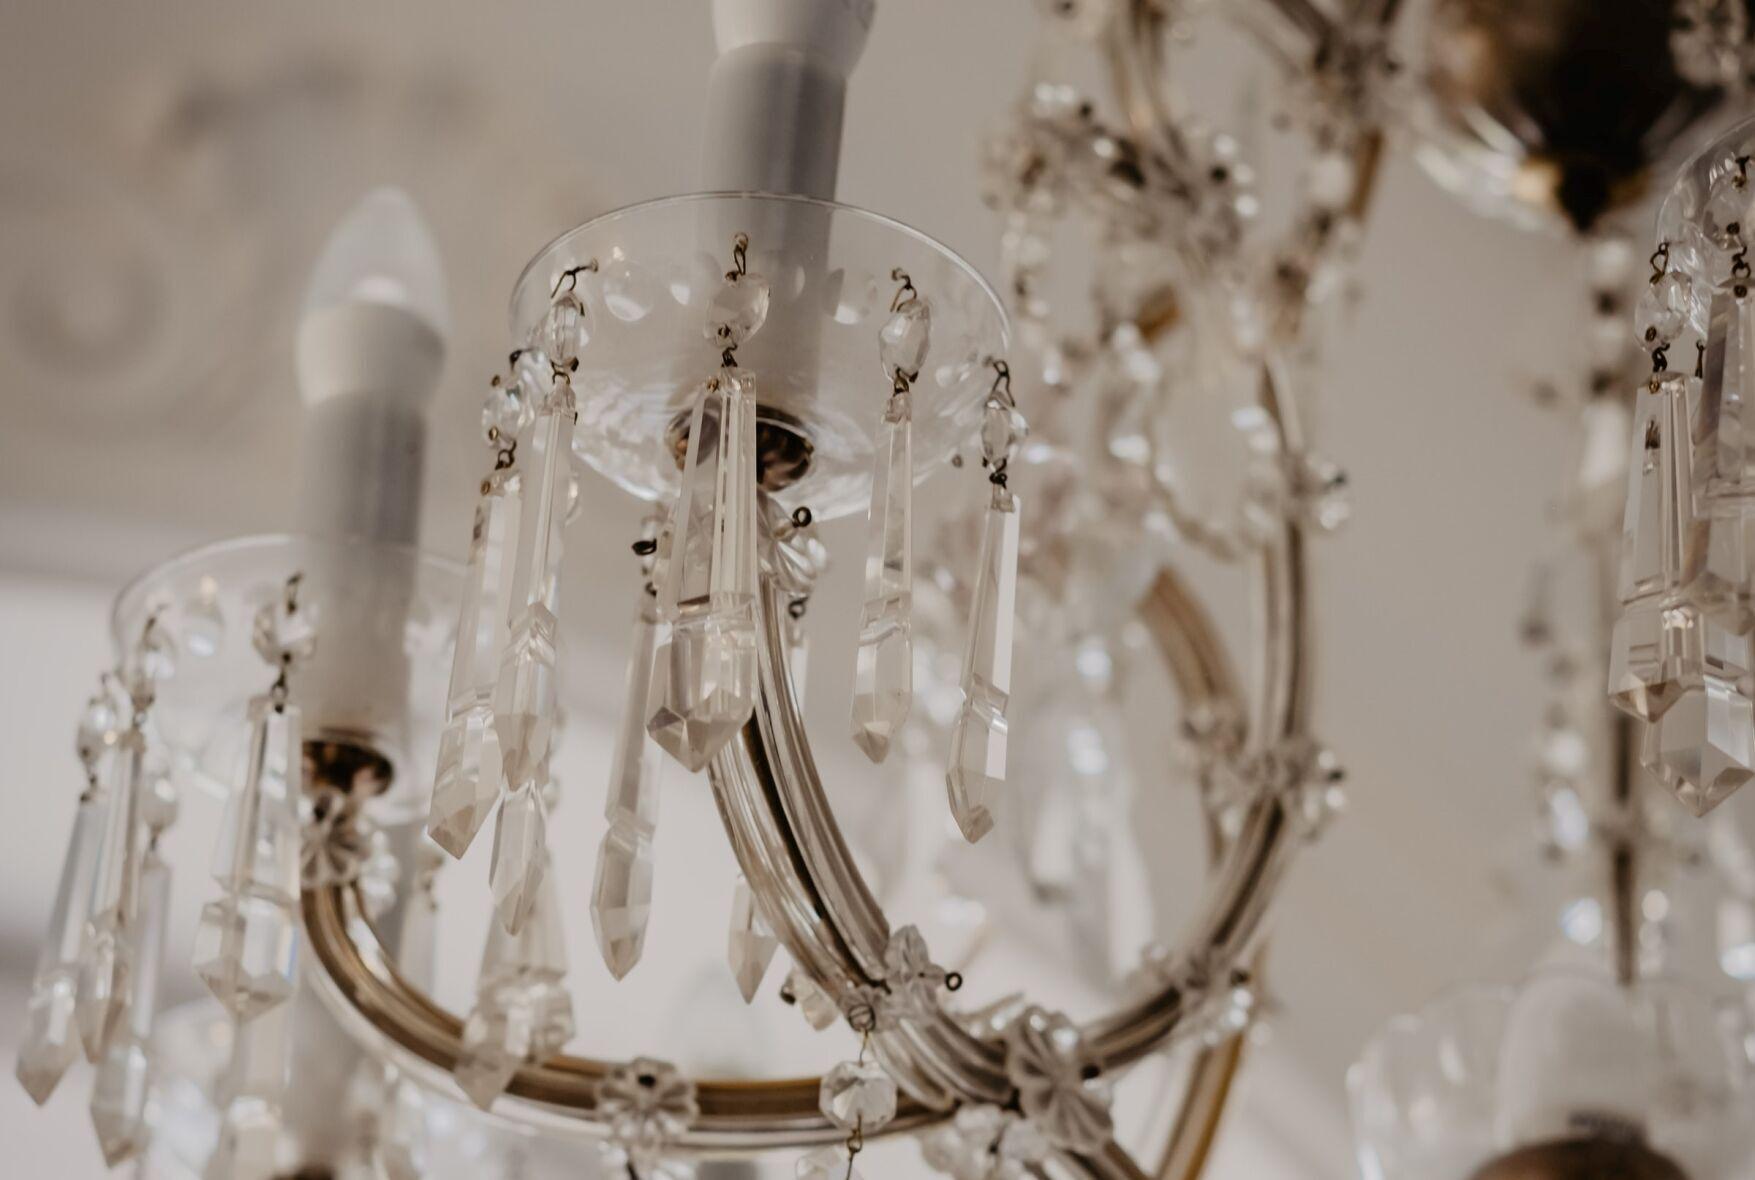 Upgrade your space with these DIY chandelier tutorials from TikTok